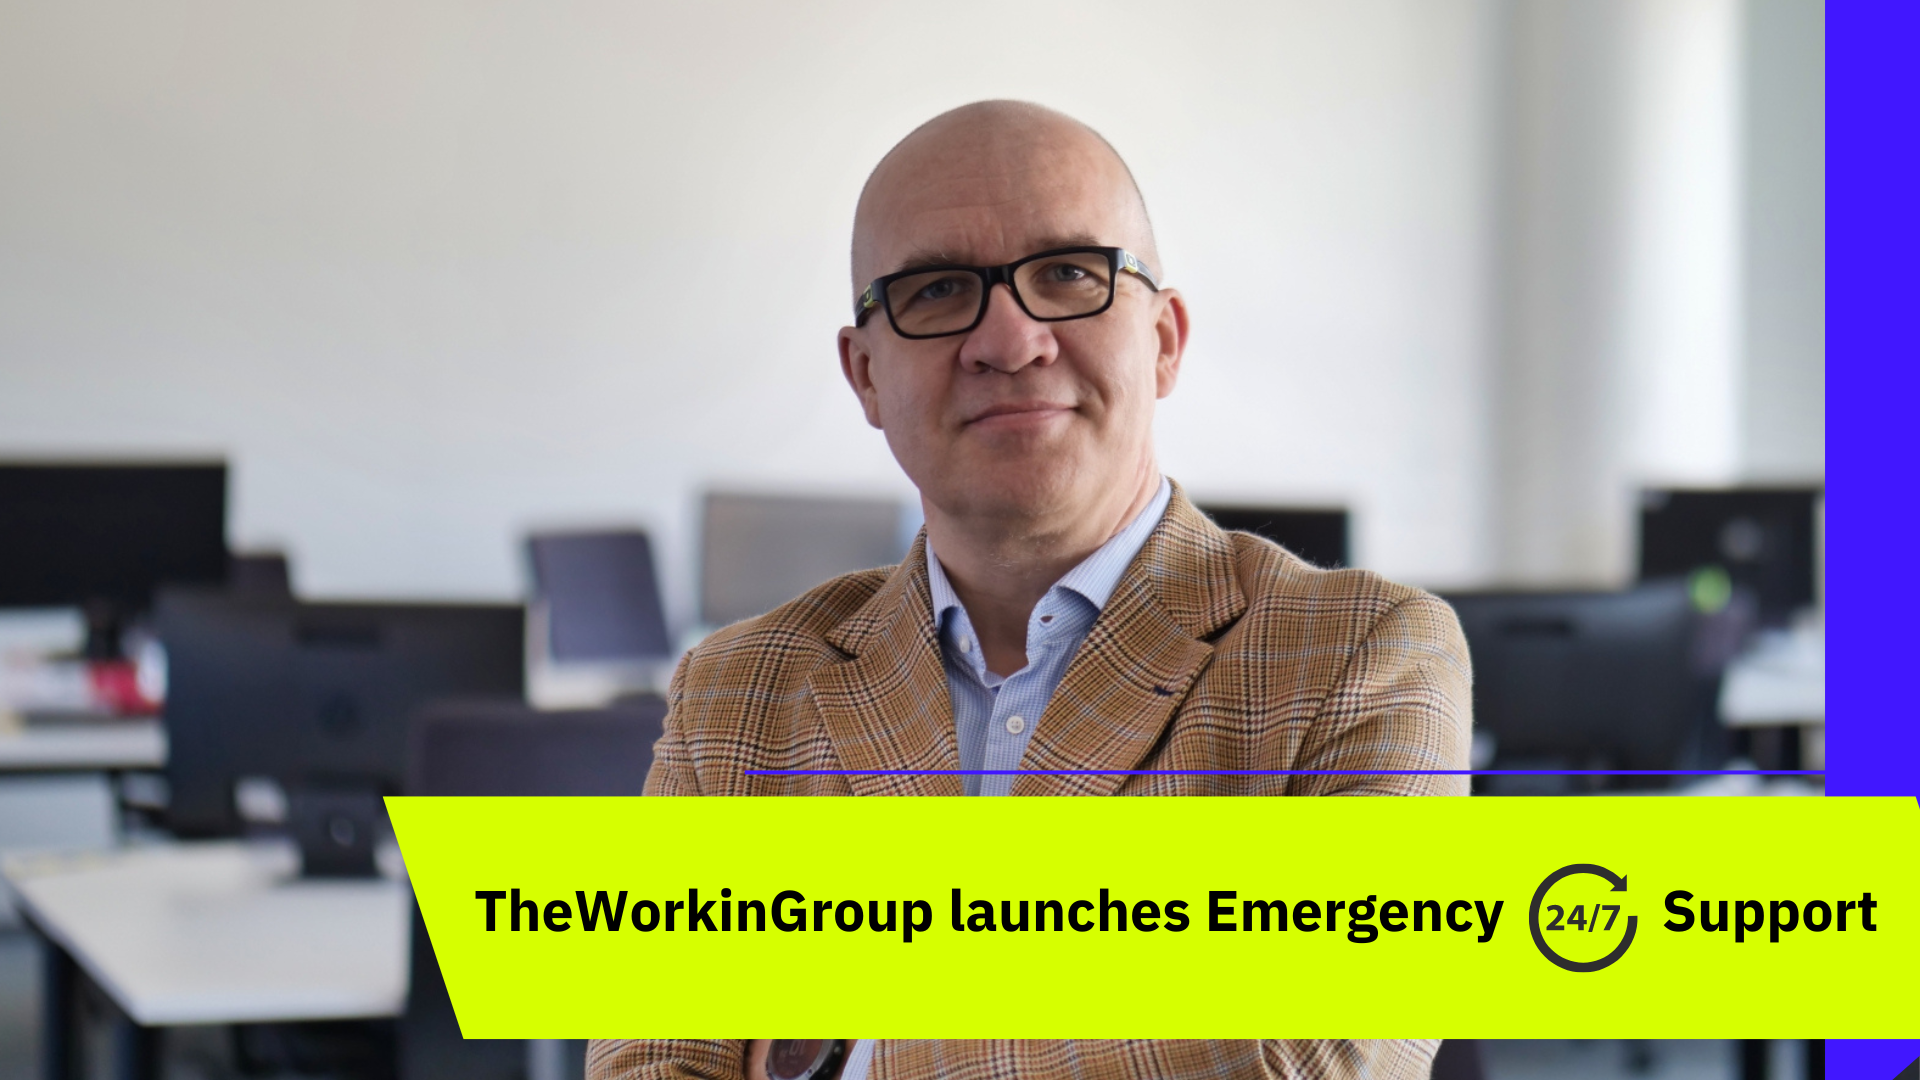 TheWorkinGroup expands DevOps Factory services to include Emergency 24/7 Support